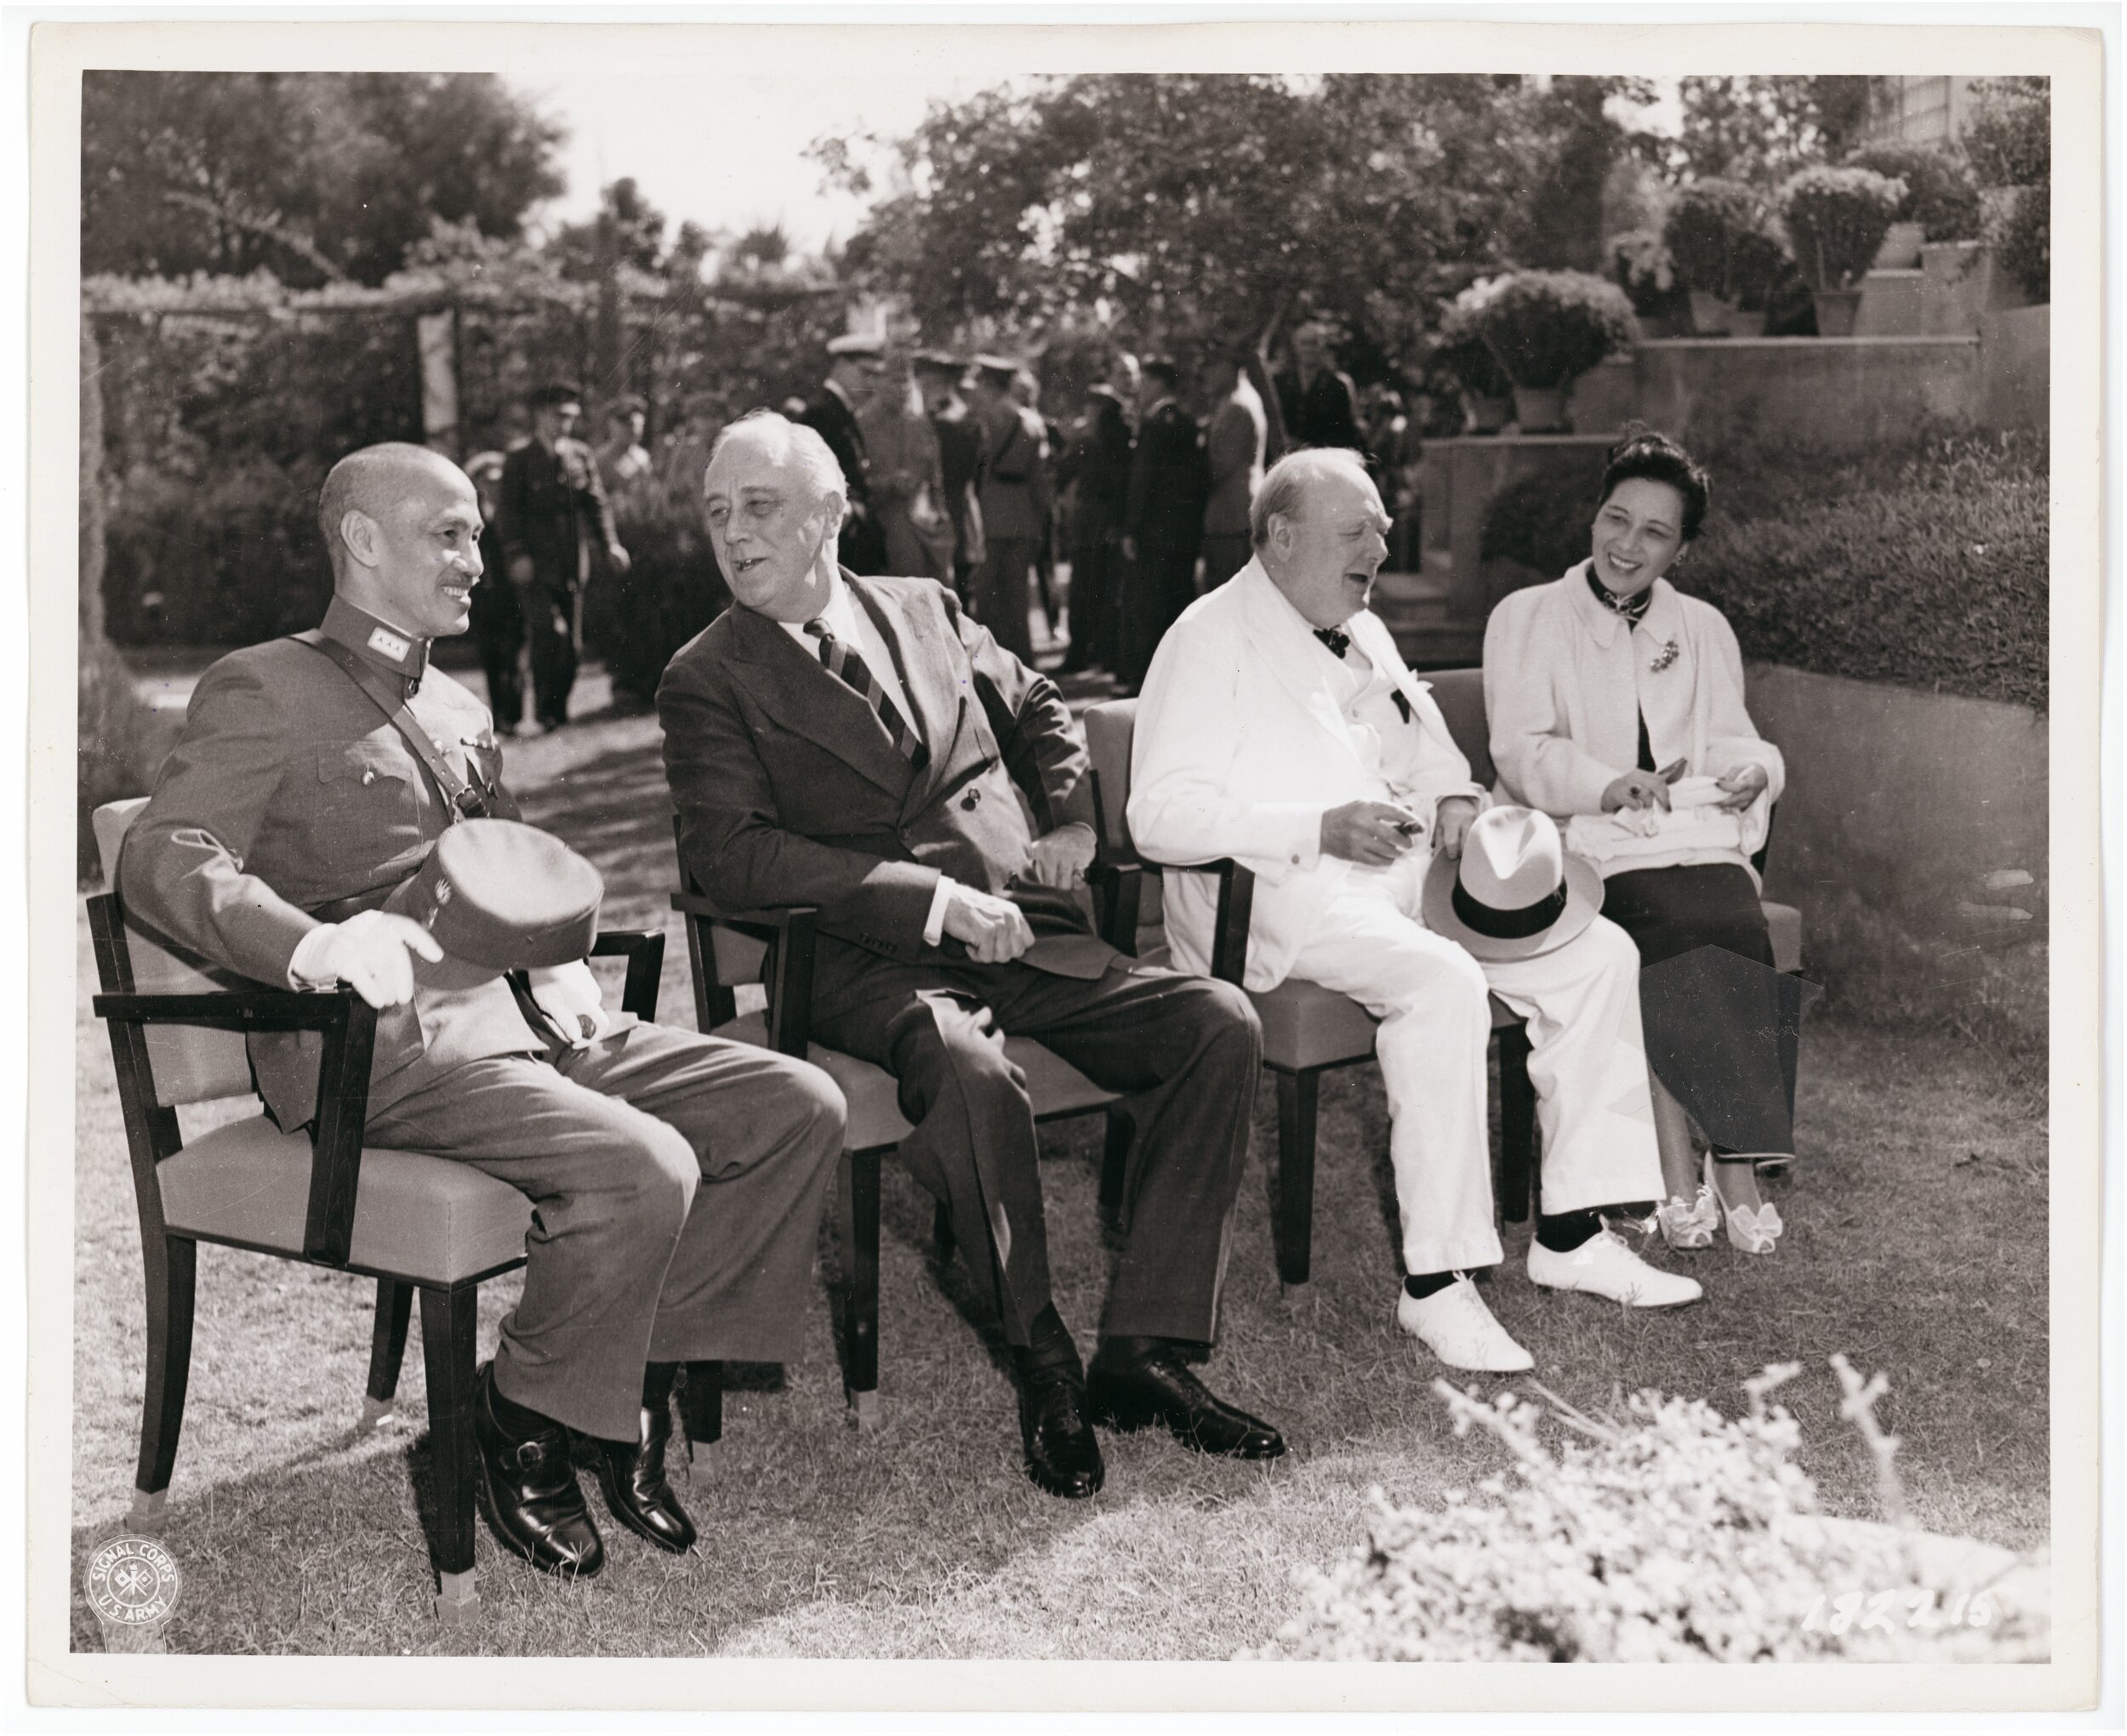  There’s always been high politics as well. Here’s FDR with Chiang Kaishek and Churchill in Cairo. One of FDR’s ambitions was to elevate China to parity with the UK and the USSR. 